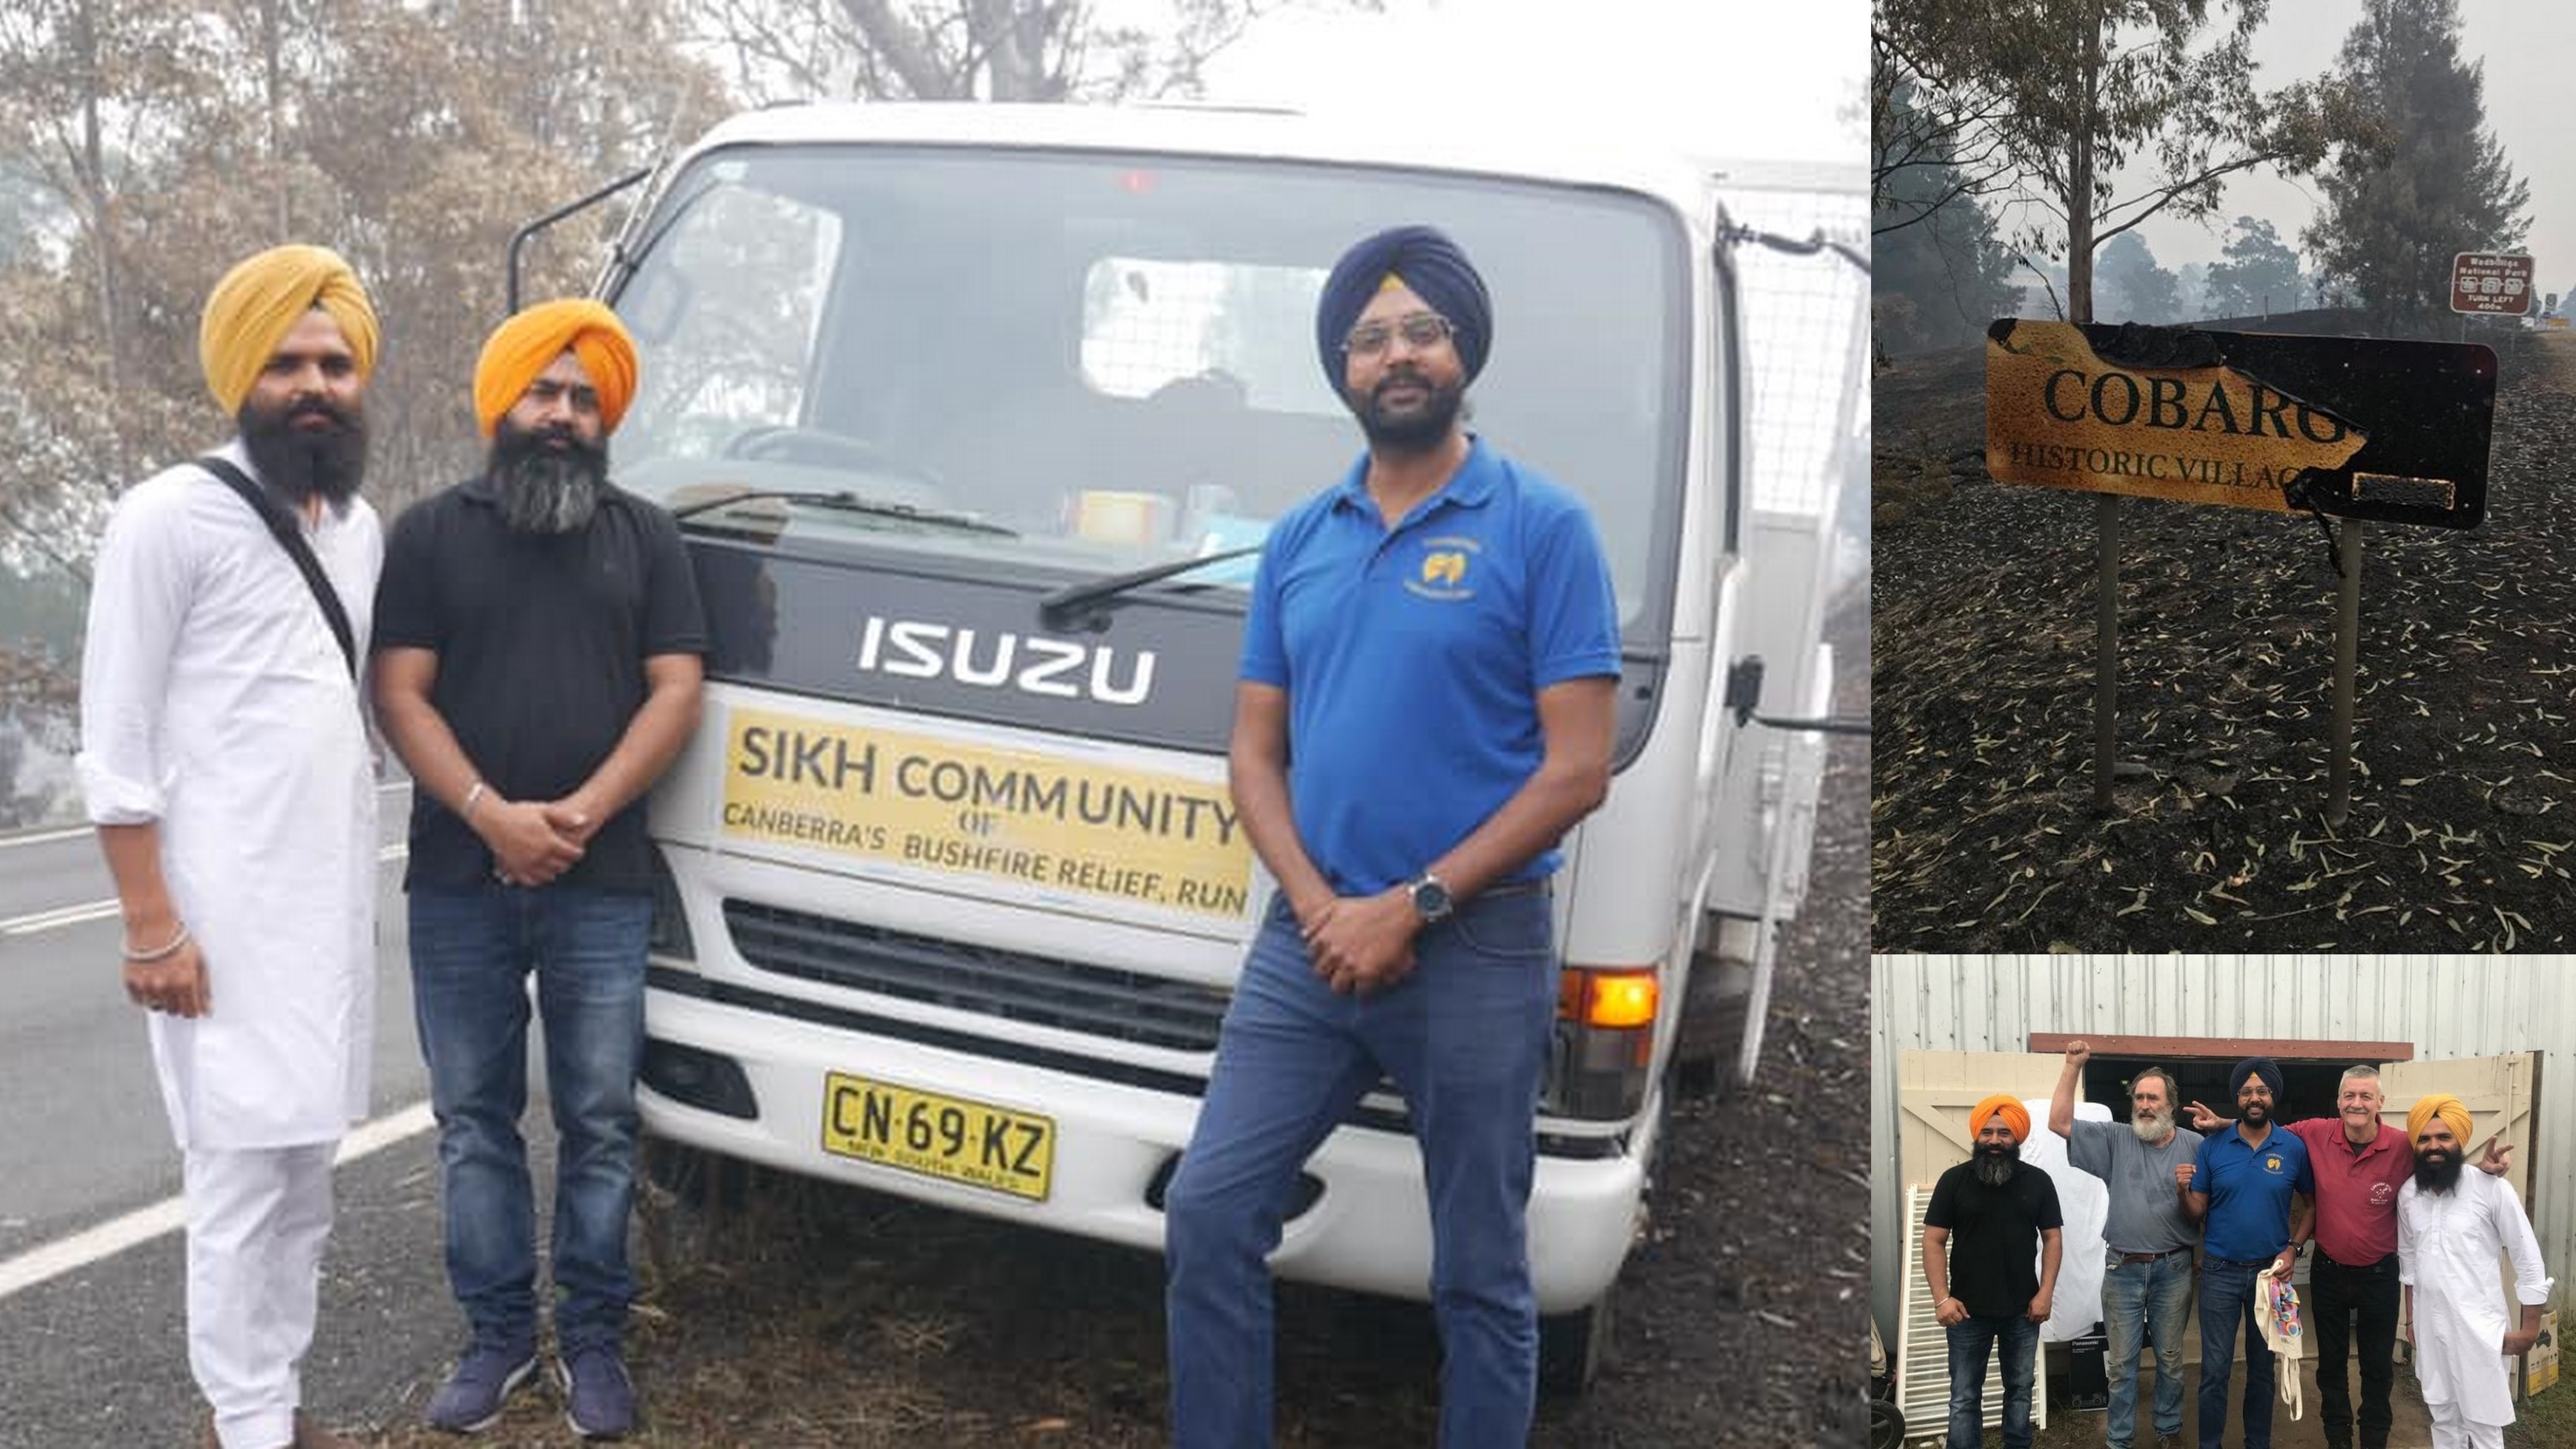 Canberra's Sikh community delivered groceries to the bushfire-affected communities in Cobargo, NSW.